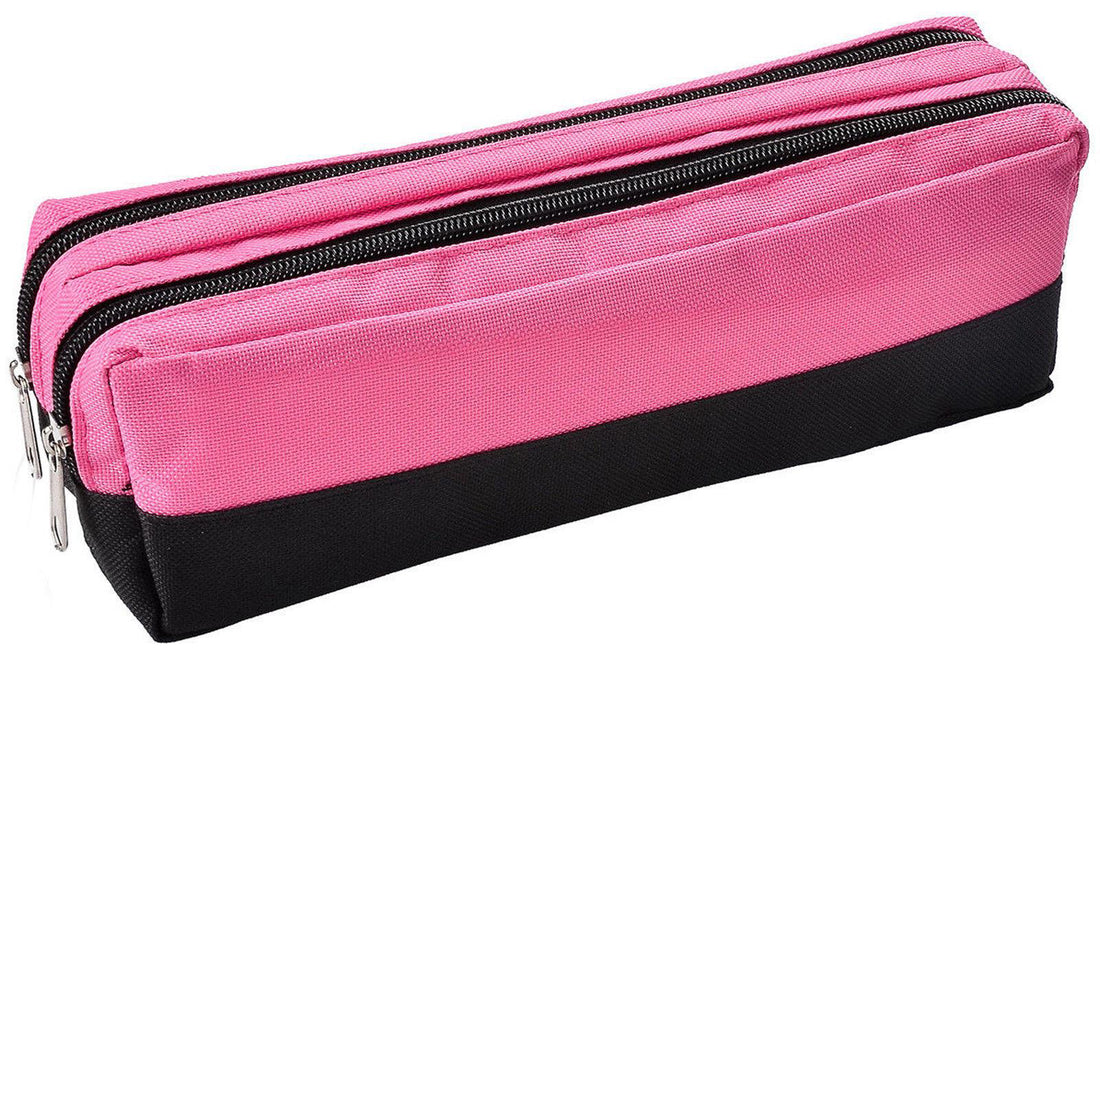 Large Double Zip Fabric Pencil Case - Ideal For School/College/Uni.- Make up Bag